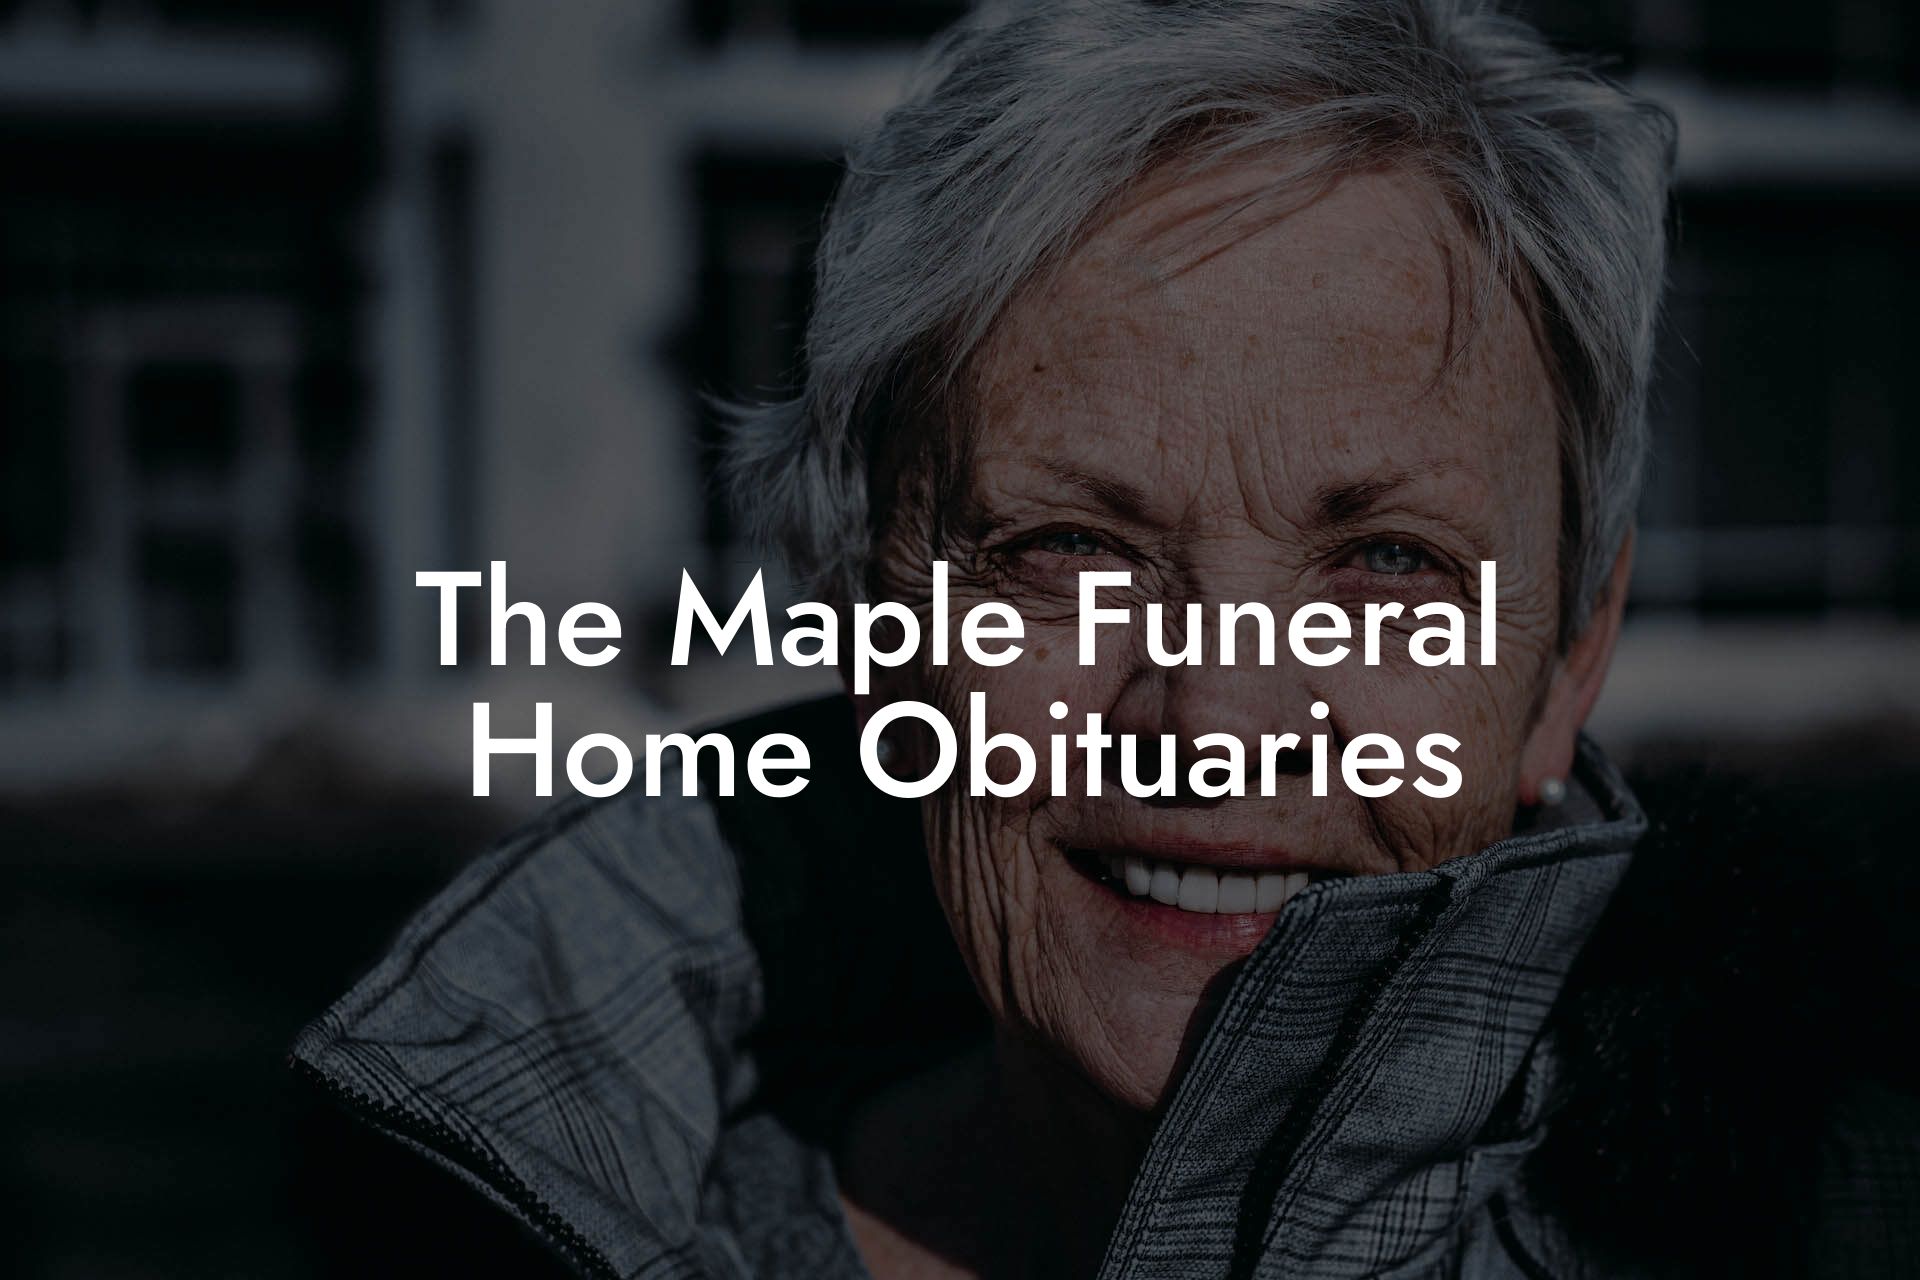 The Maple Funeral Home Obituaries